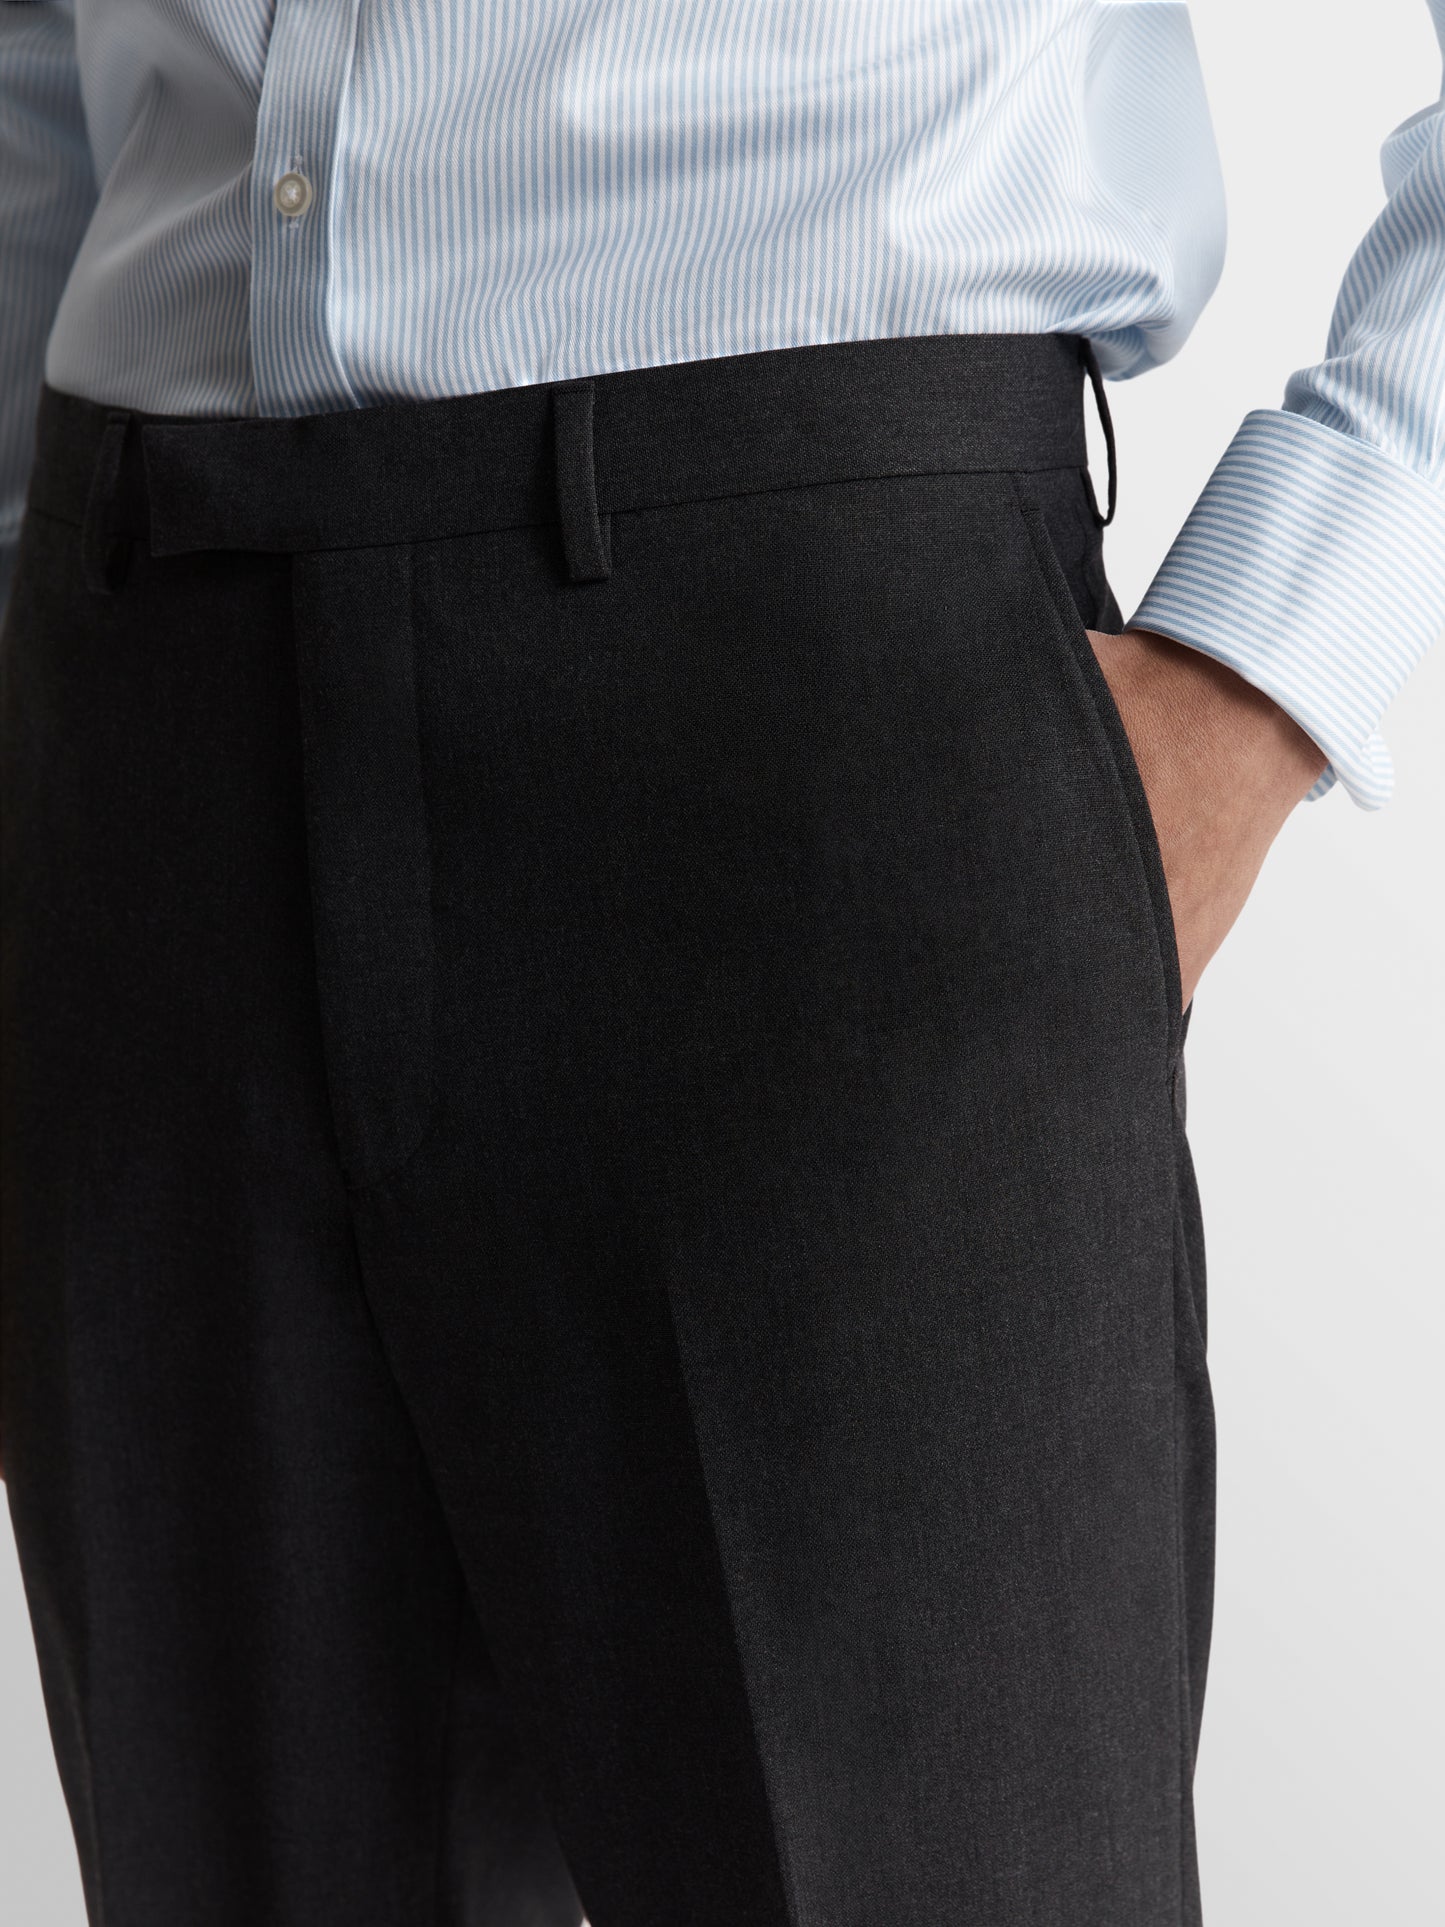 Image 1 of Westminster Infinity Regular Fit Charcoal Trousers